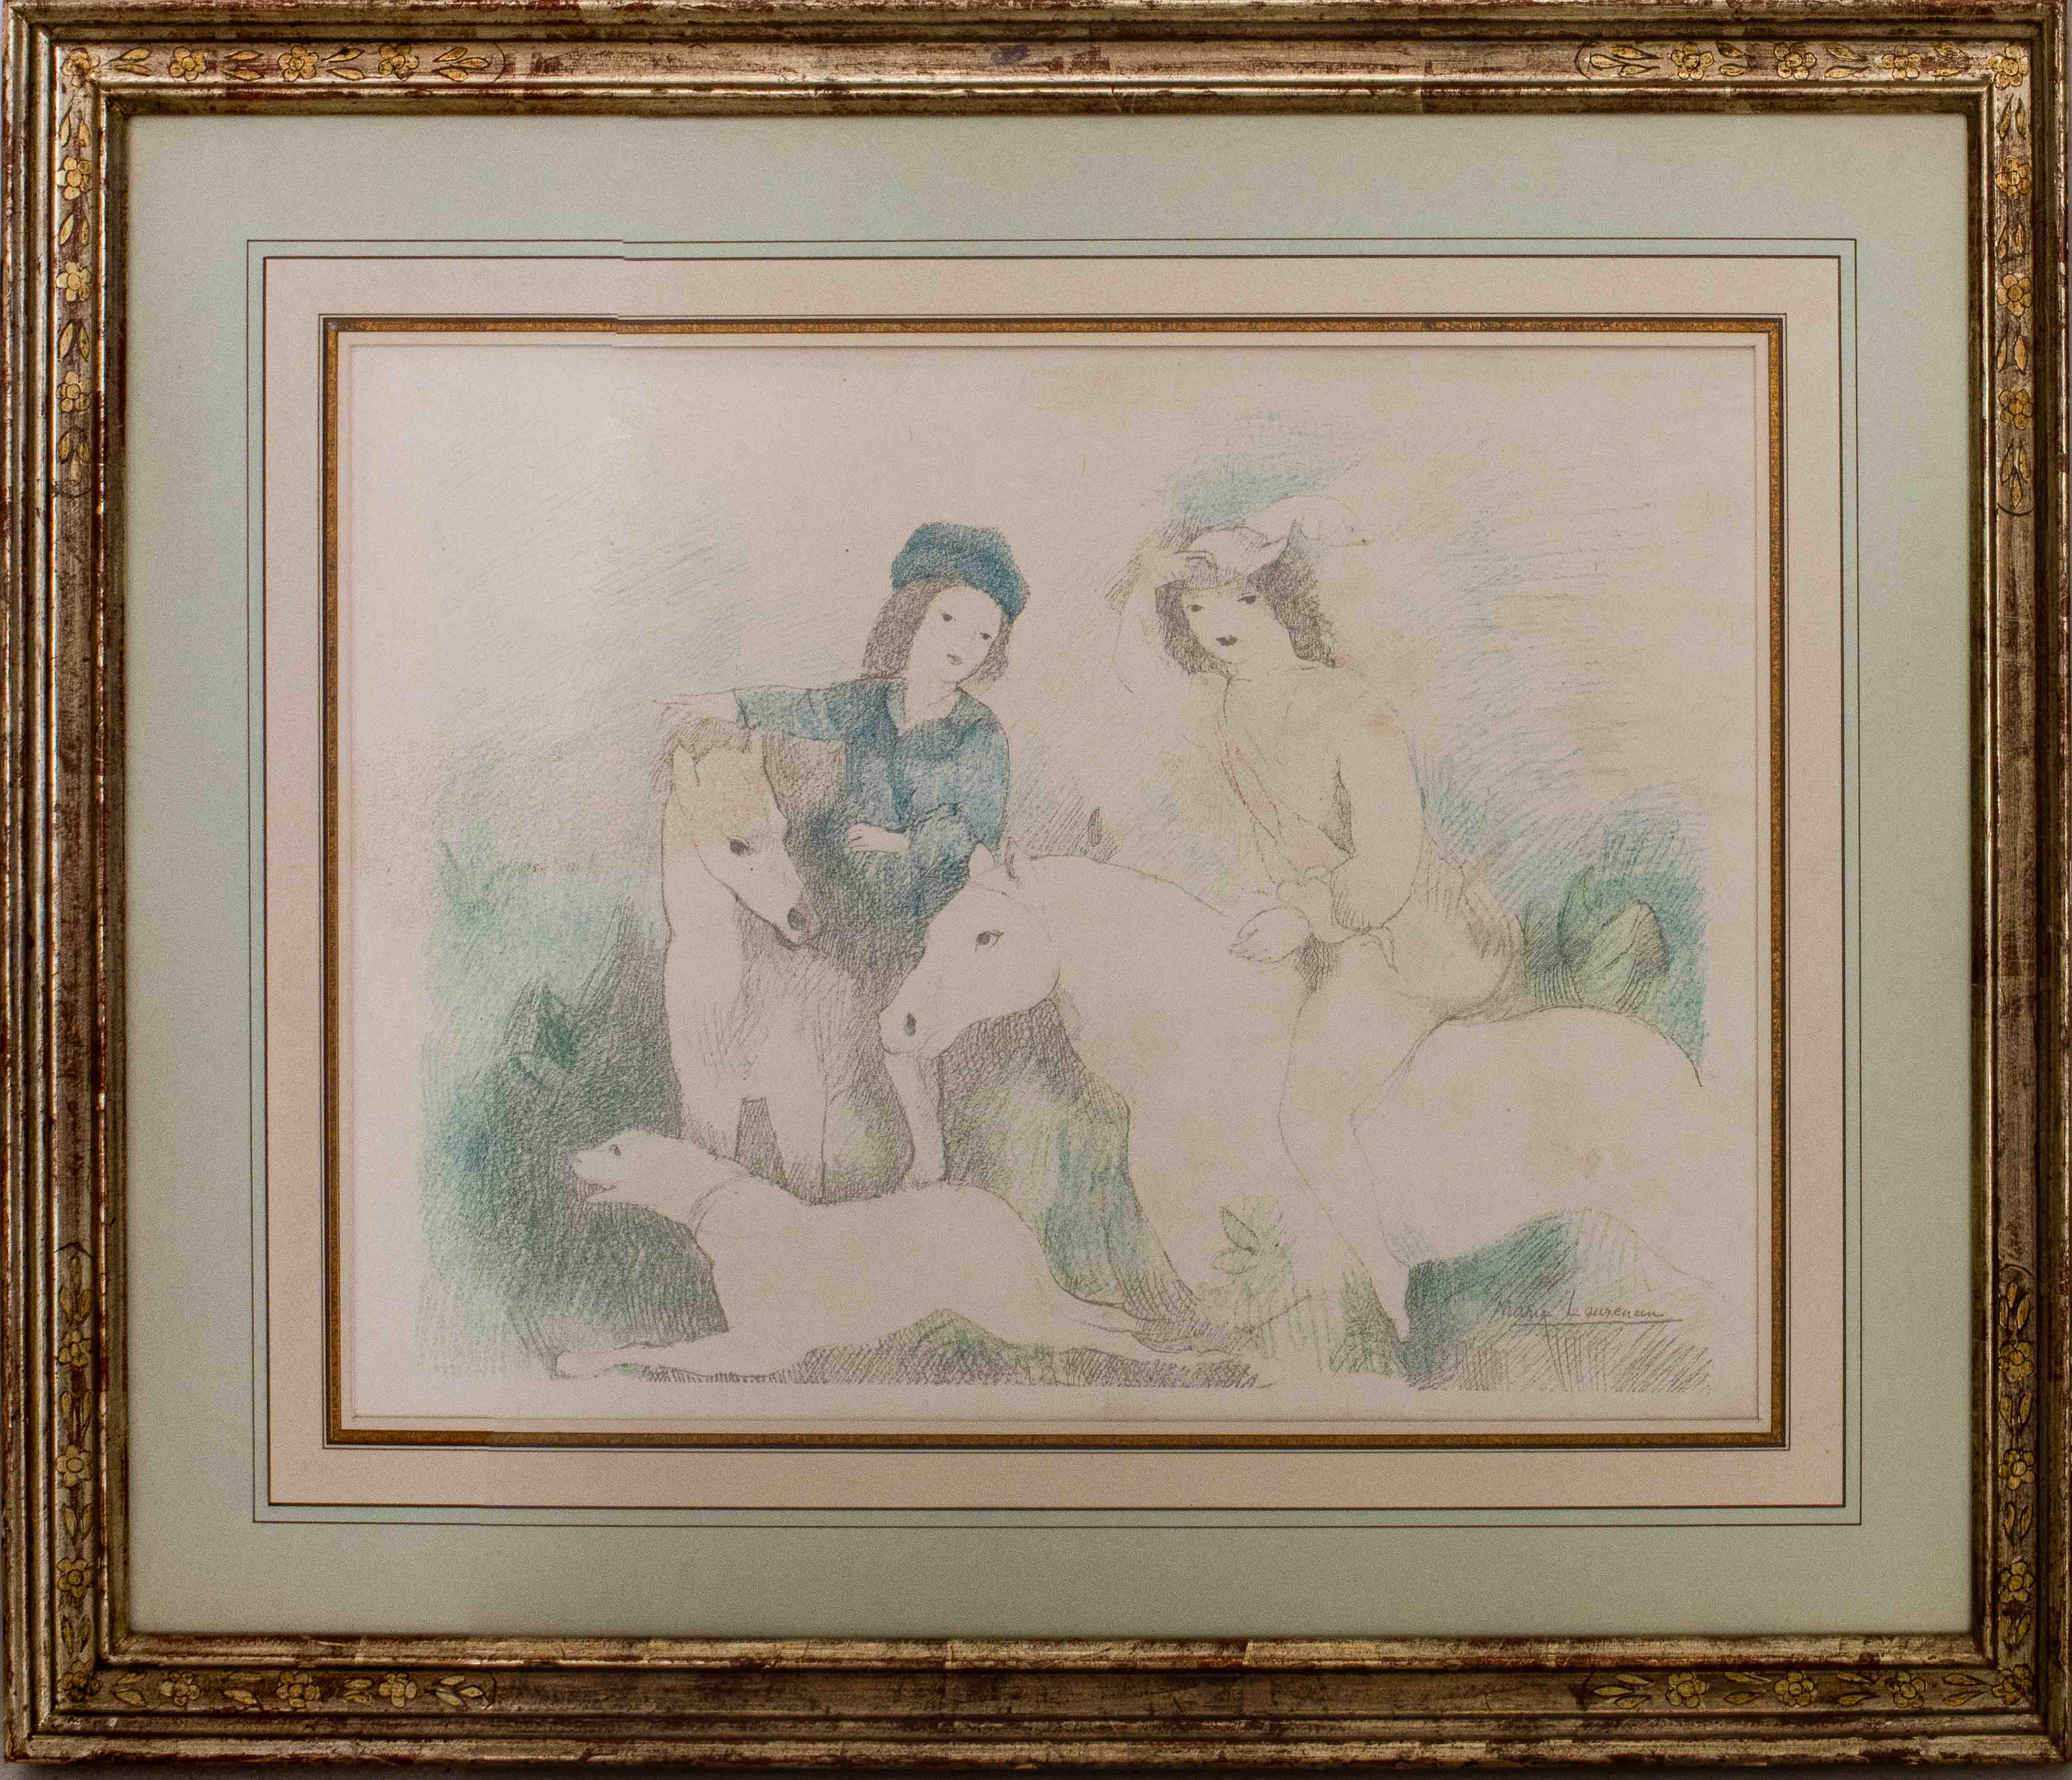 MARIE LAURENCIN LITHOGRAPH OF FIGURES